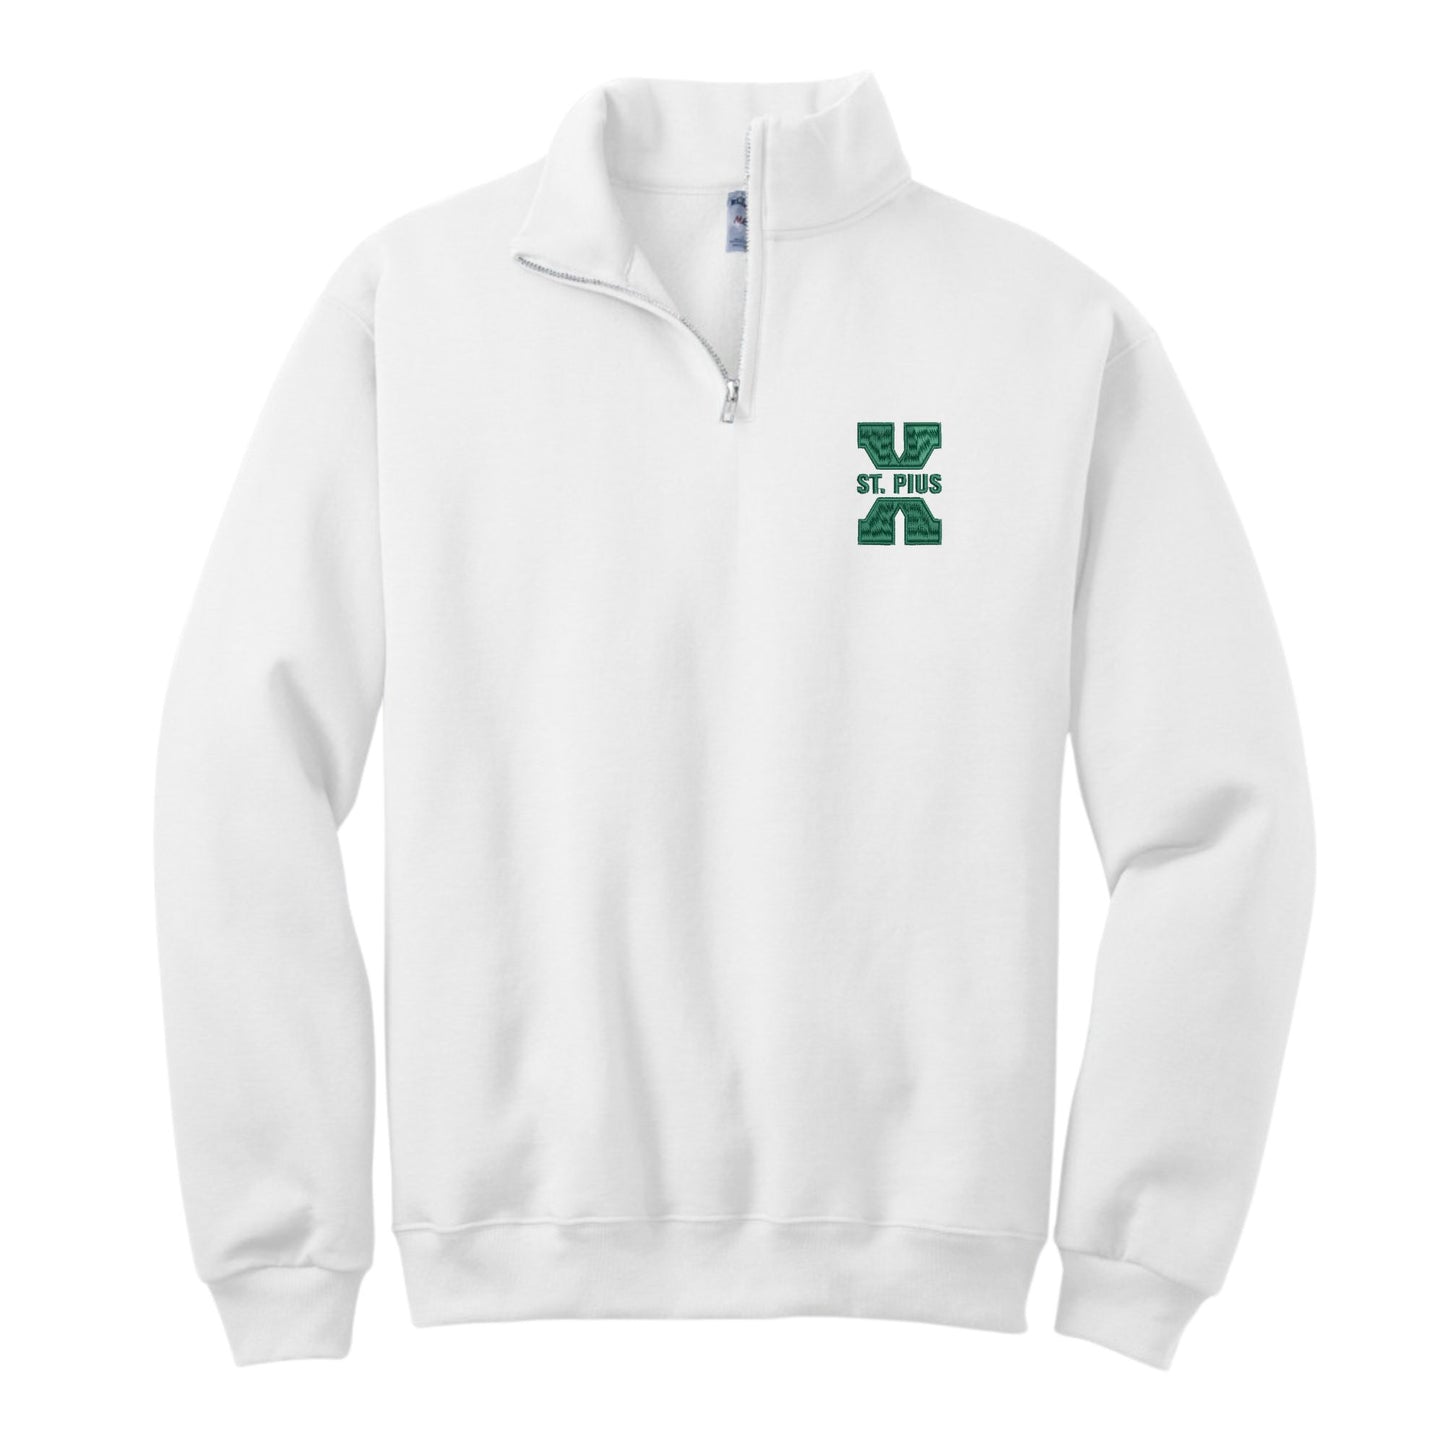 white quarter zip with embroidered x logo